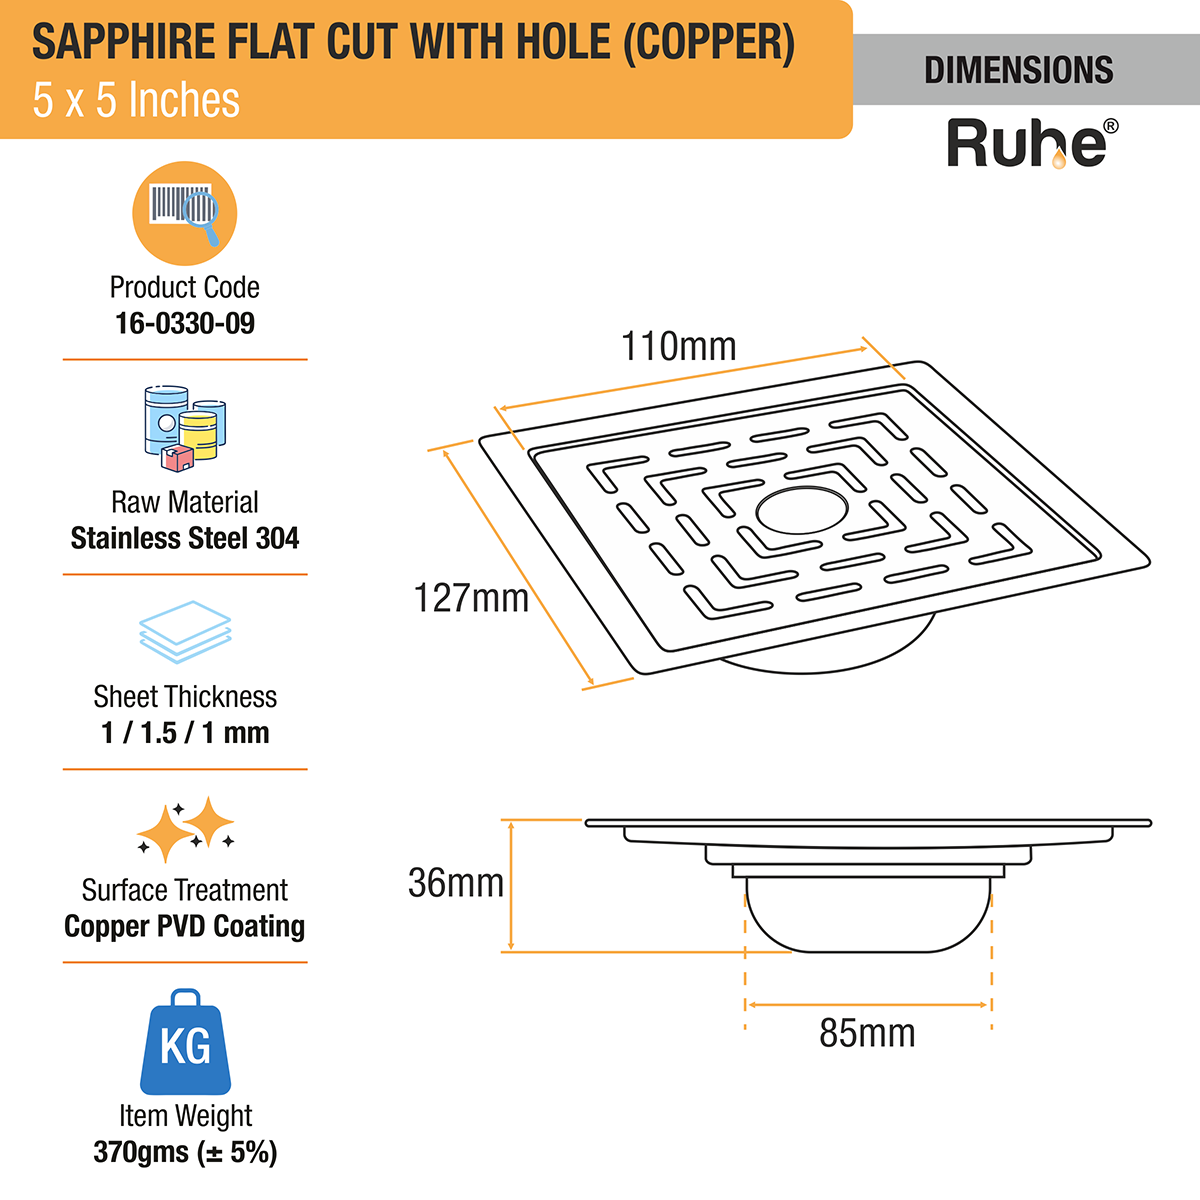 Sapphire Square Flat Cut Floor Drain in Antique Copper PVD Coating (5 x 5 Inches) with Hole dimensions and size